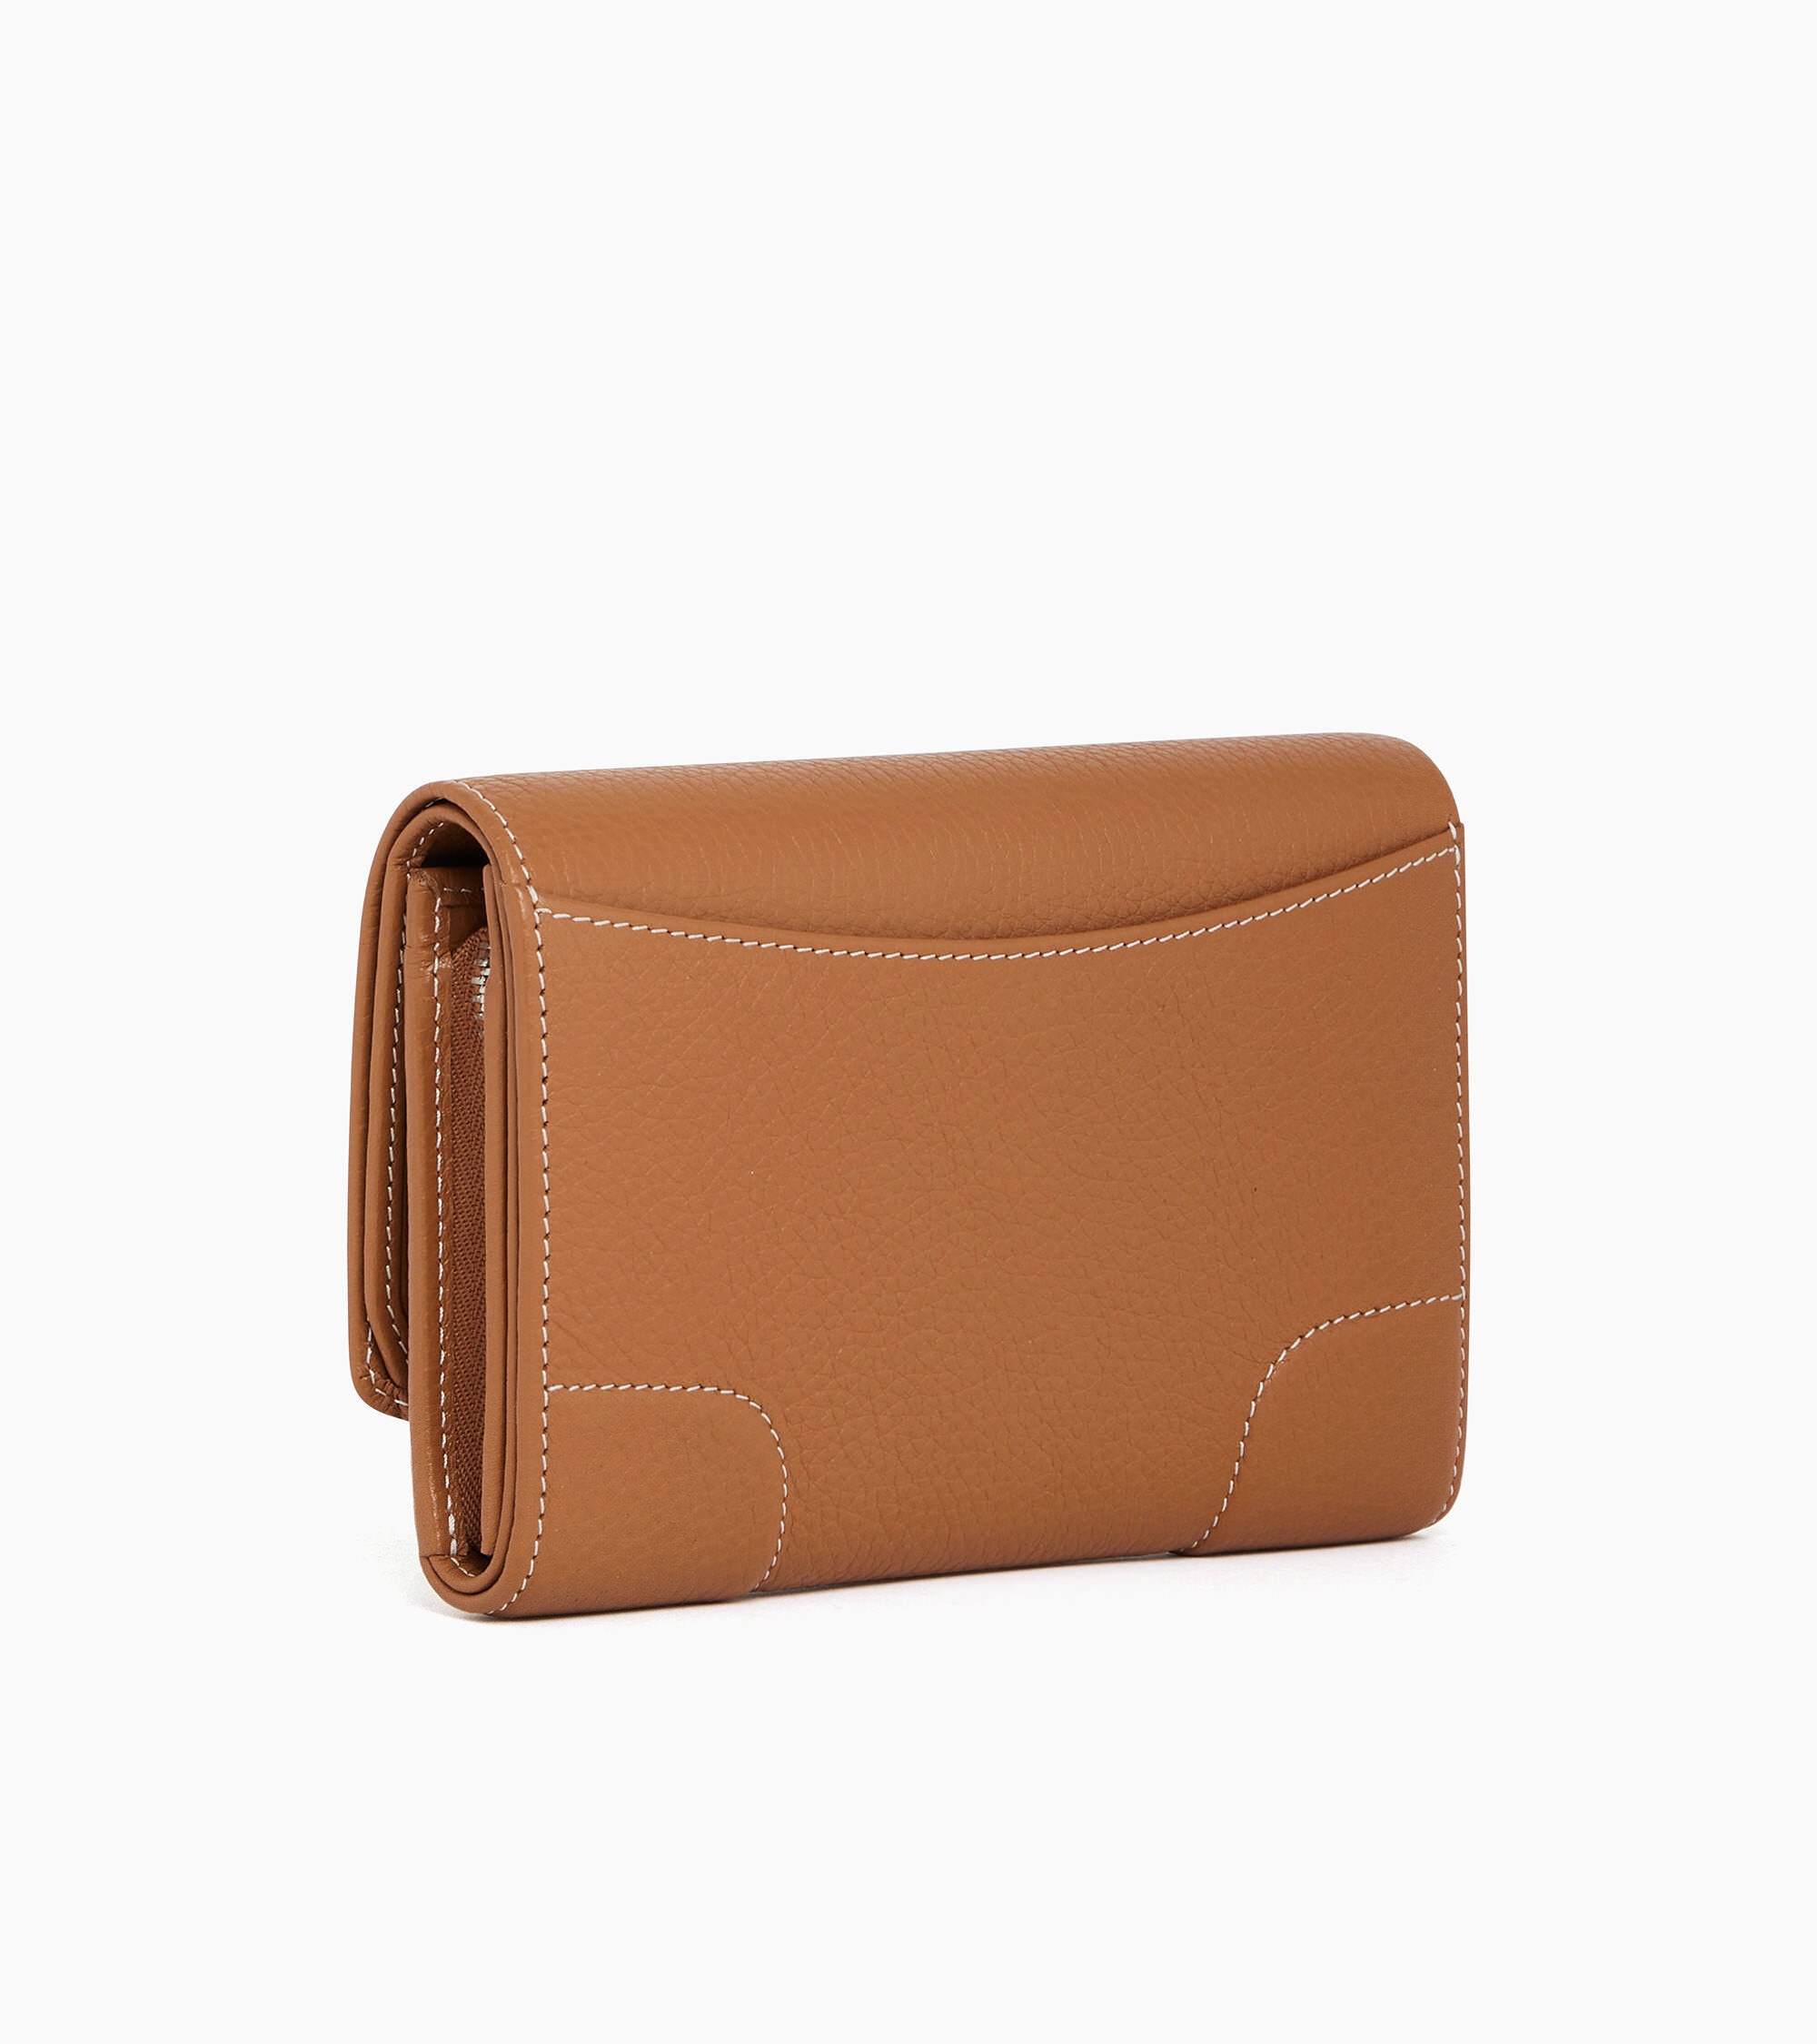 Romy coin case with flap closure in grained leather